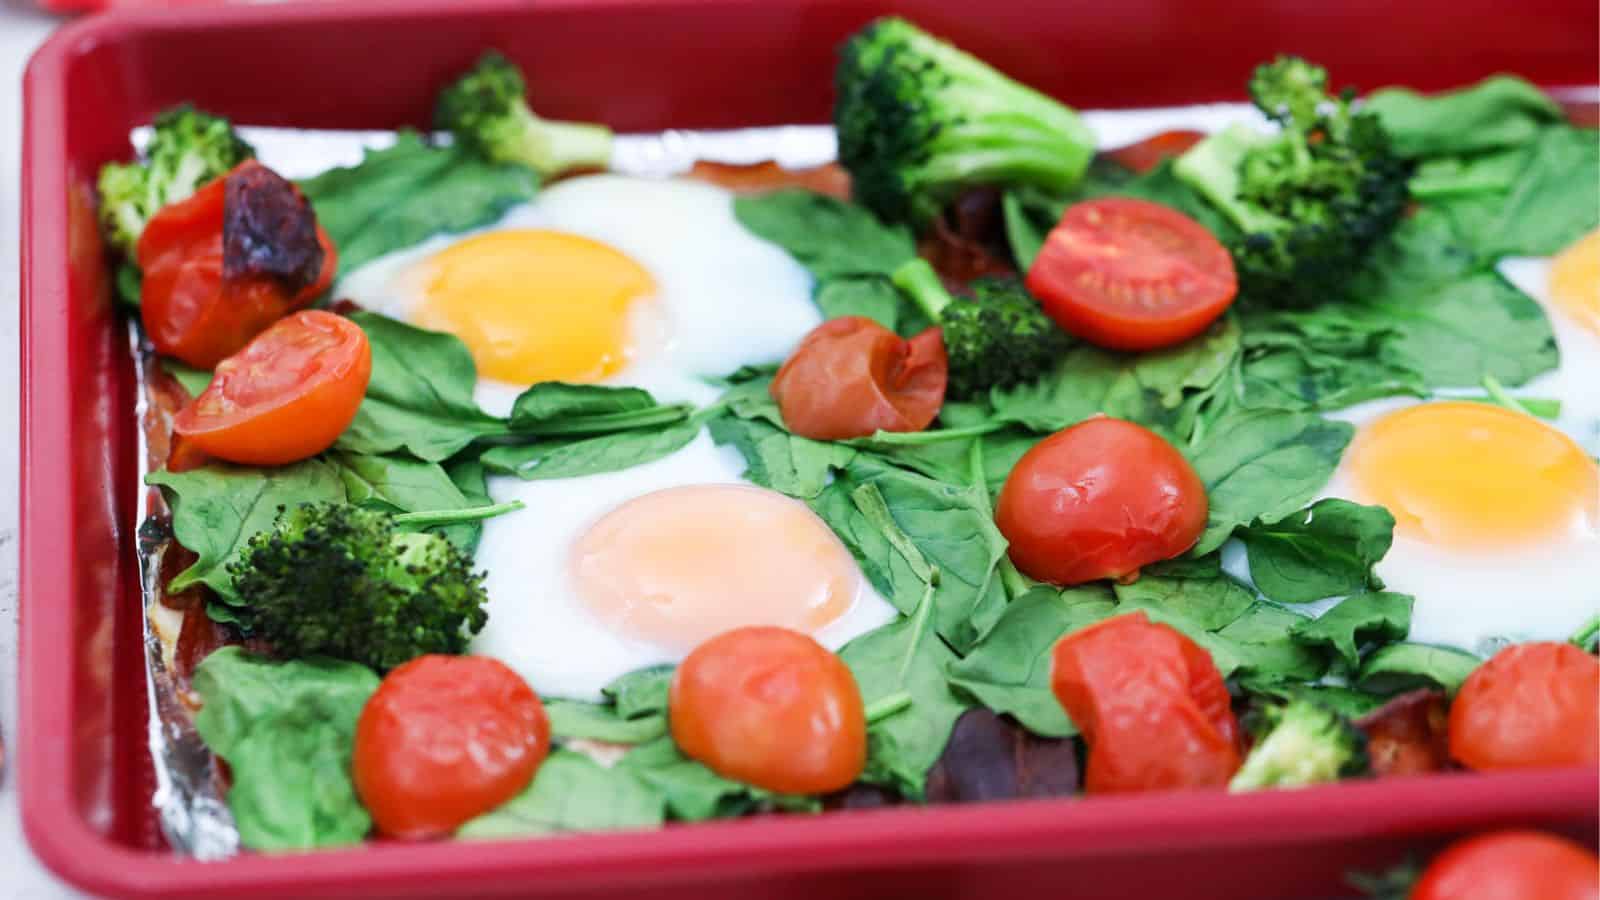 Sheet pan with cooked eggs, spinach, tomatoes, broccoli, and bacon.